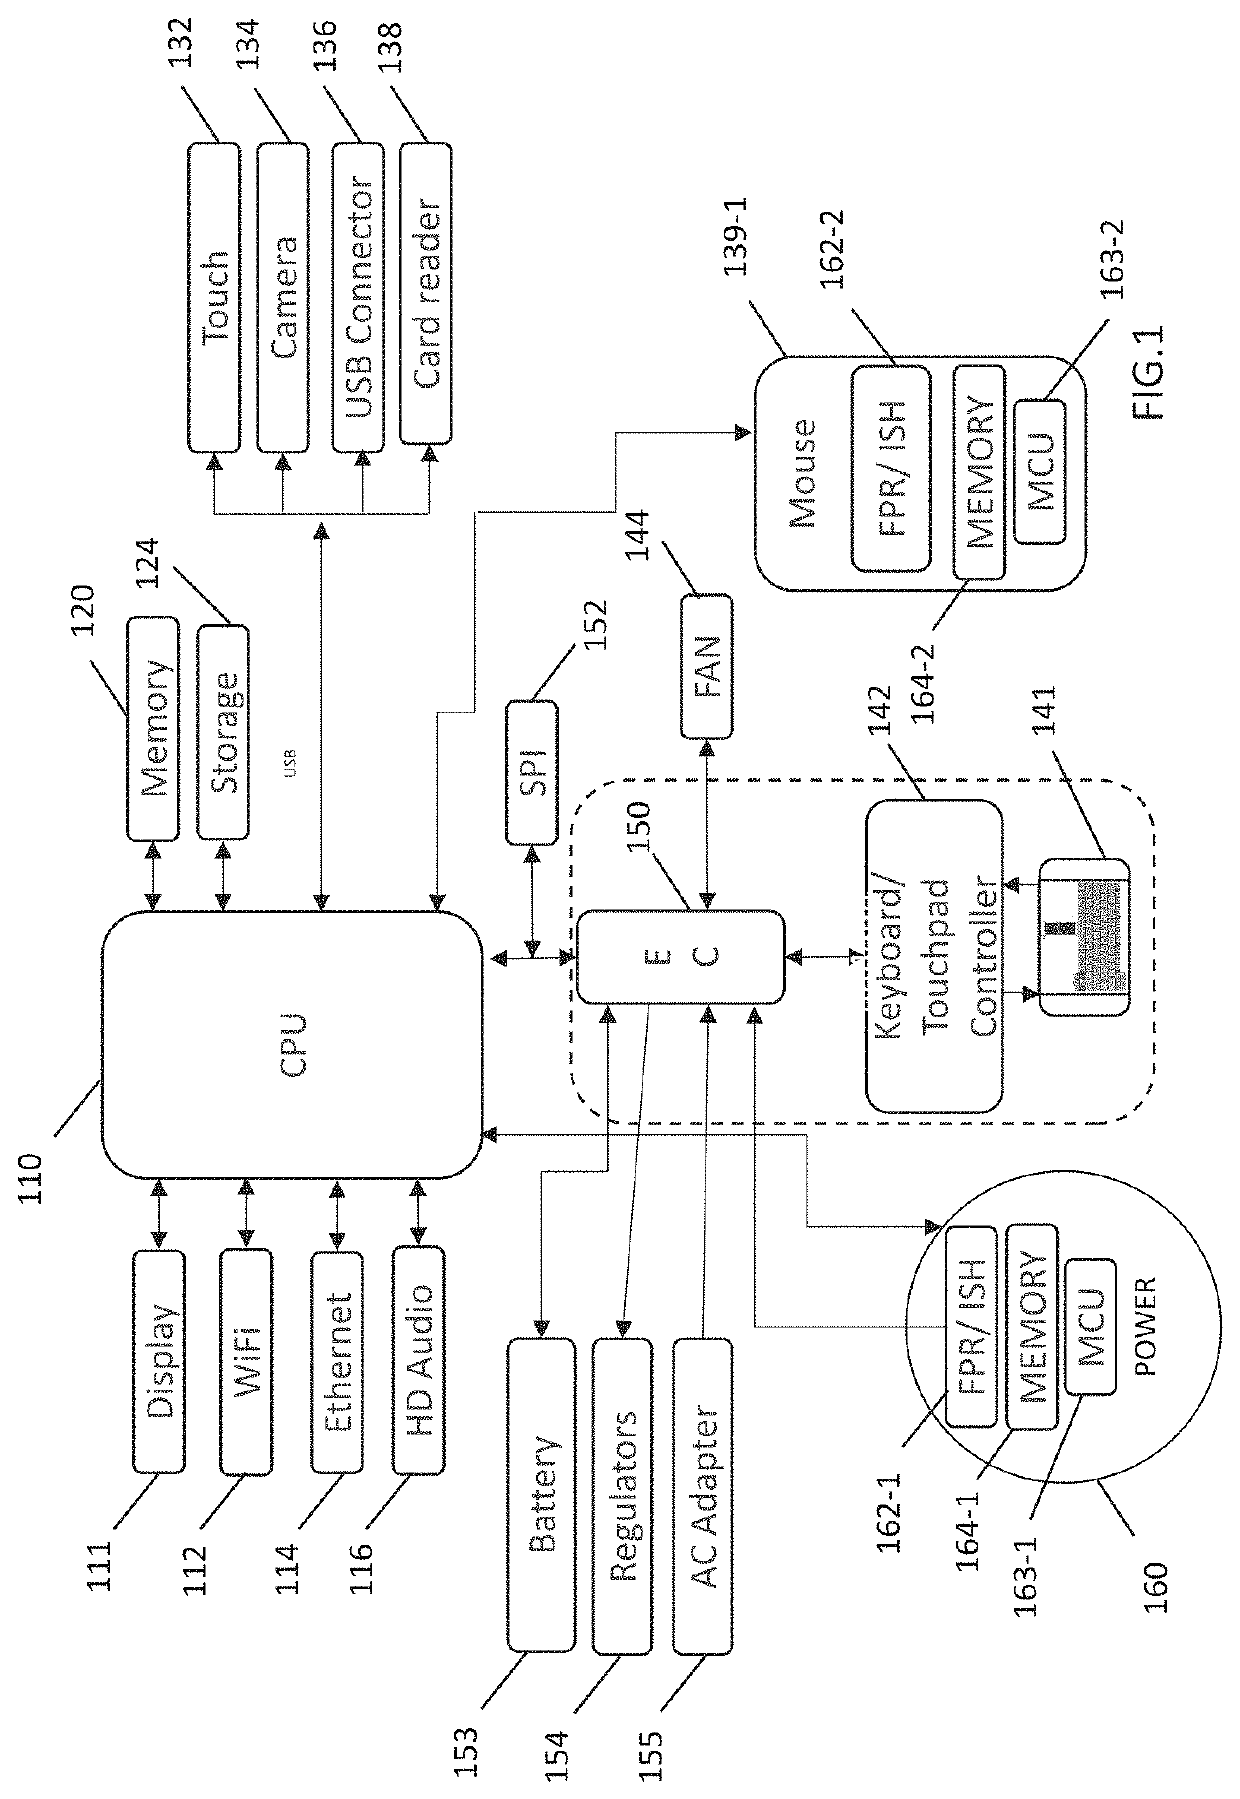 System and method for authenticating before waking an information handling system